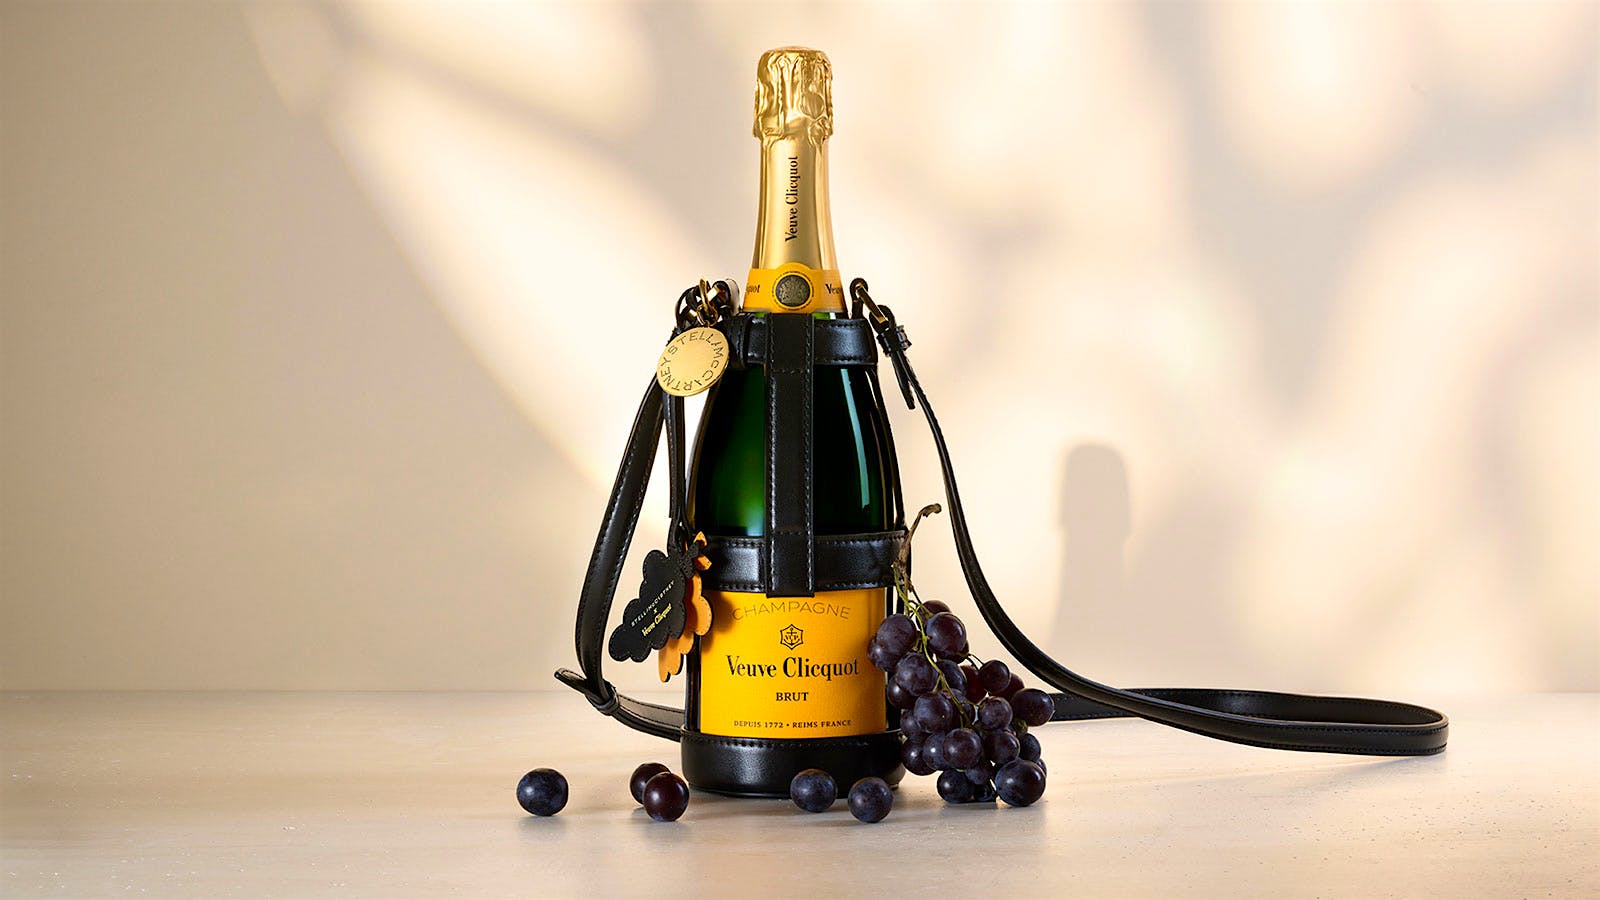 Created from vegan leather made from grape waste, a Champagne bottle holder wraps around a bottle of Veuve Clicquot